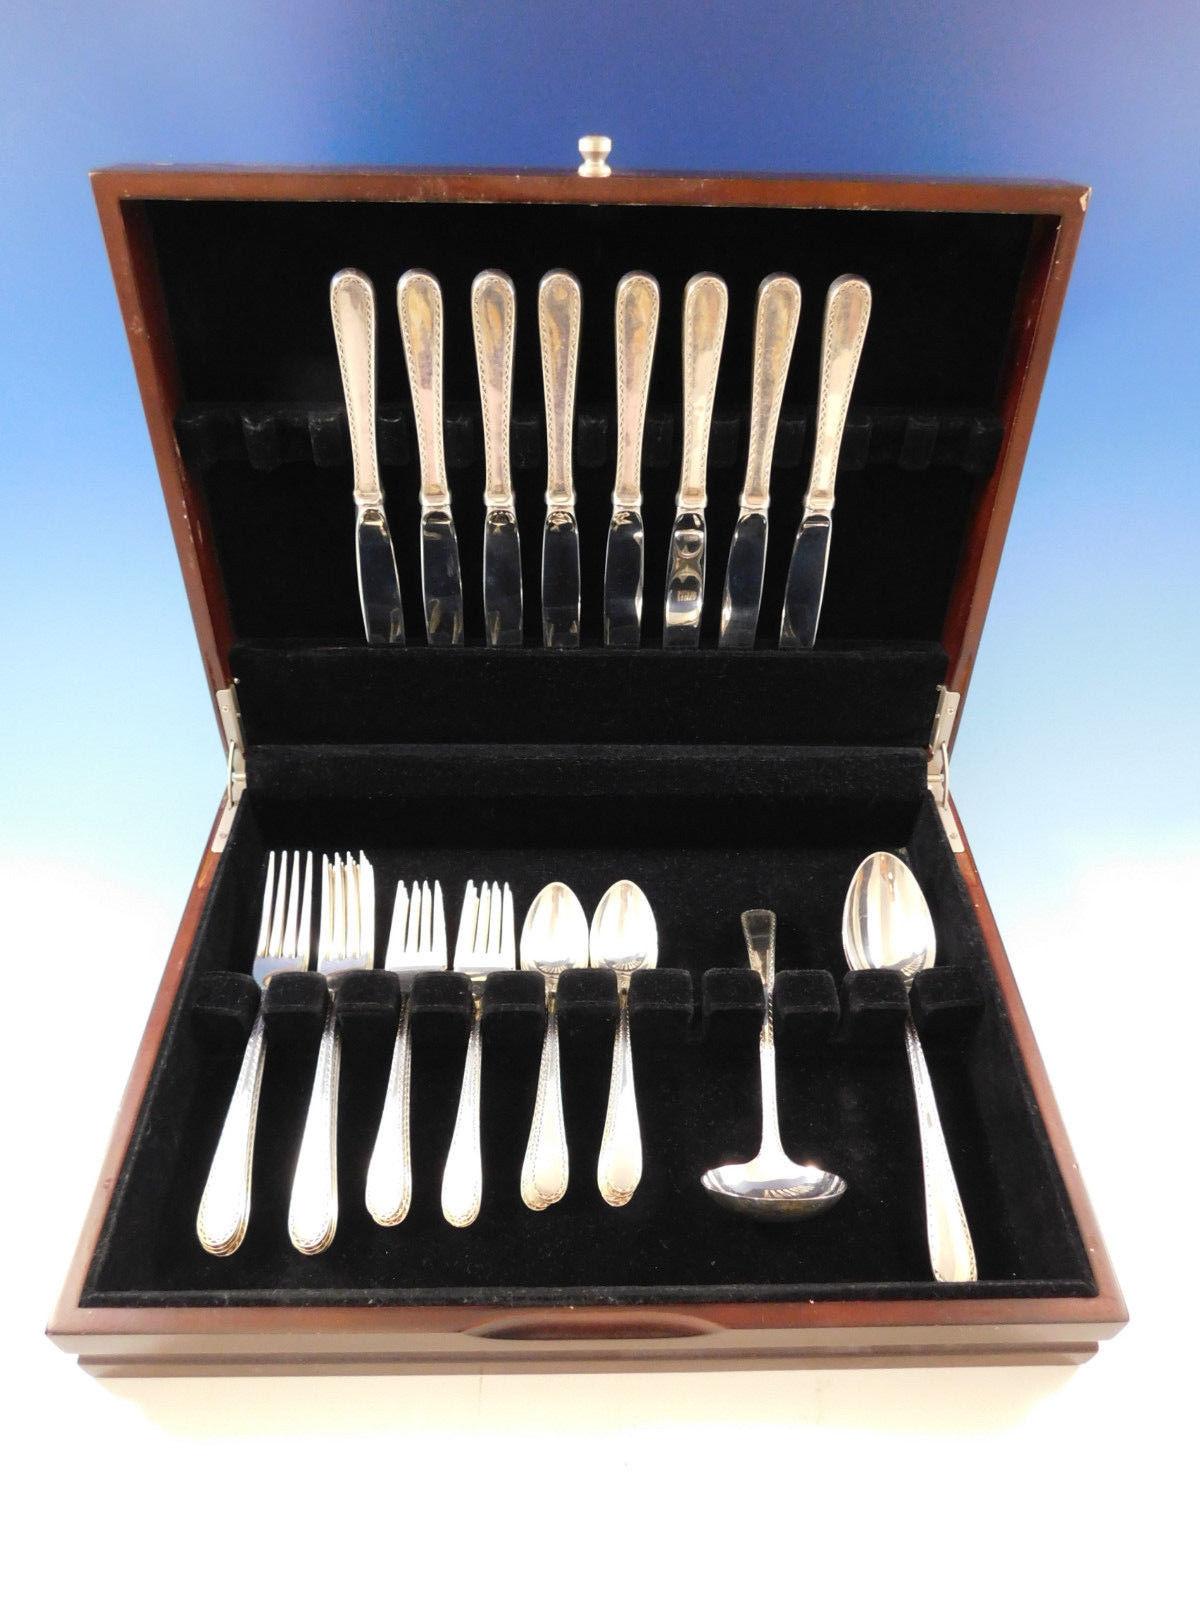 Gorgeous Winslow by Kirk sterling silver flatware set of 35 pieces. This set includes:

Eight knives, 9